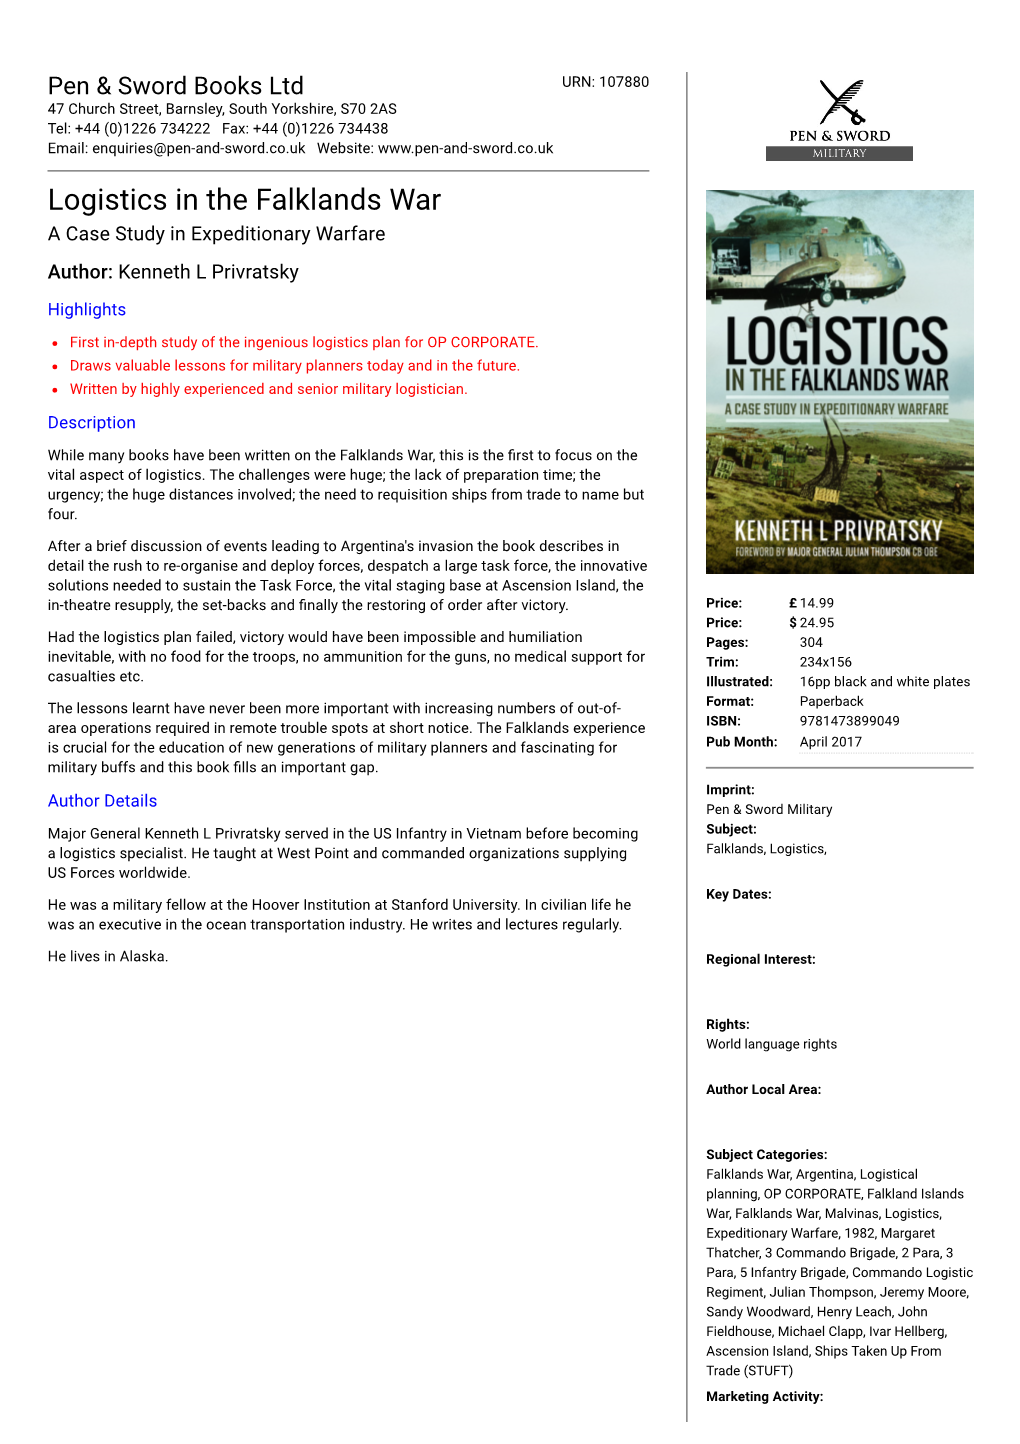 Logistics in the Falklands War a Case Study in Expeditionary Warfare Author: Kenneth L Privratsky